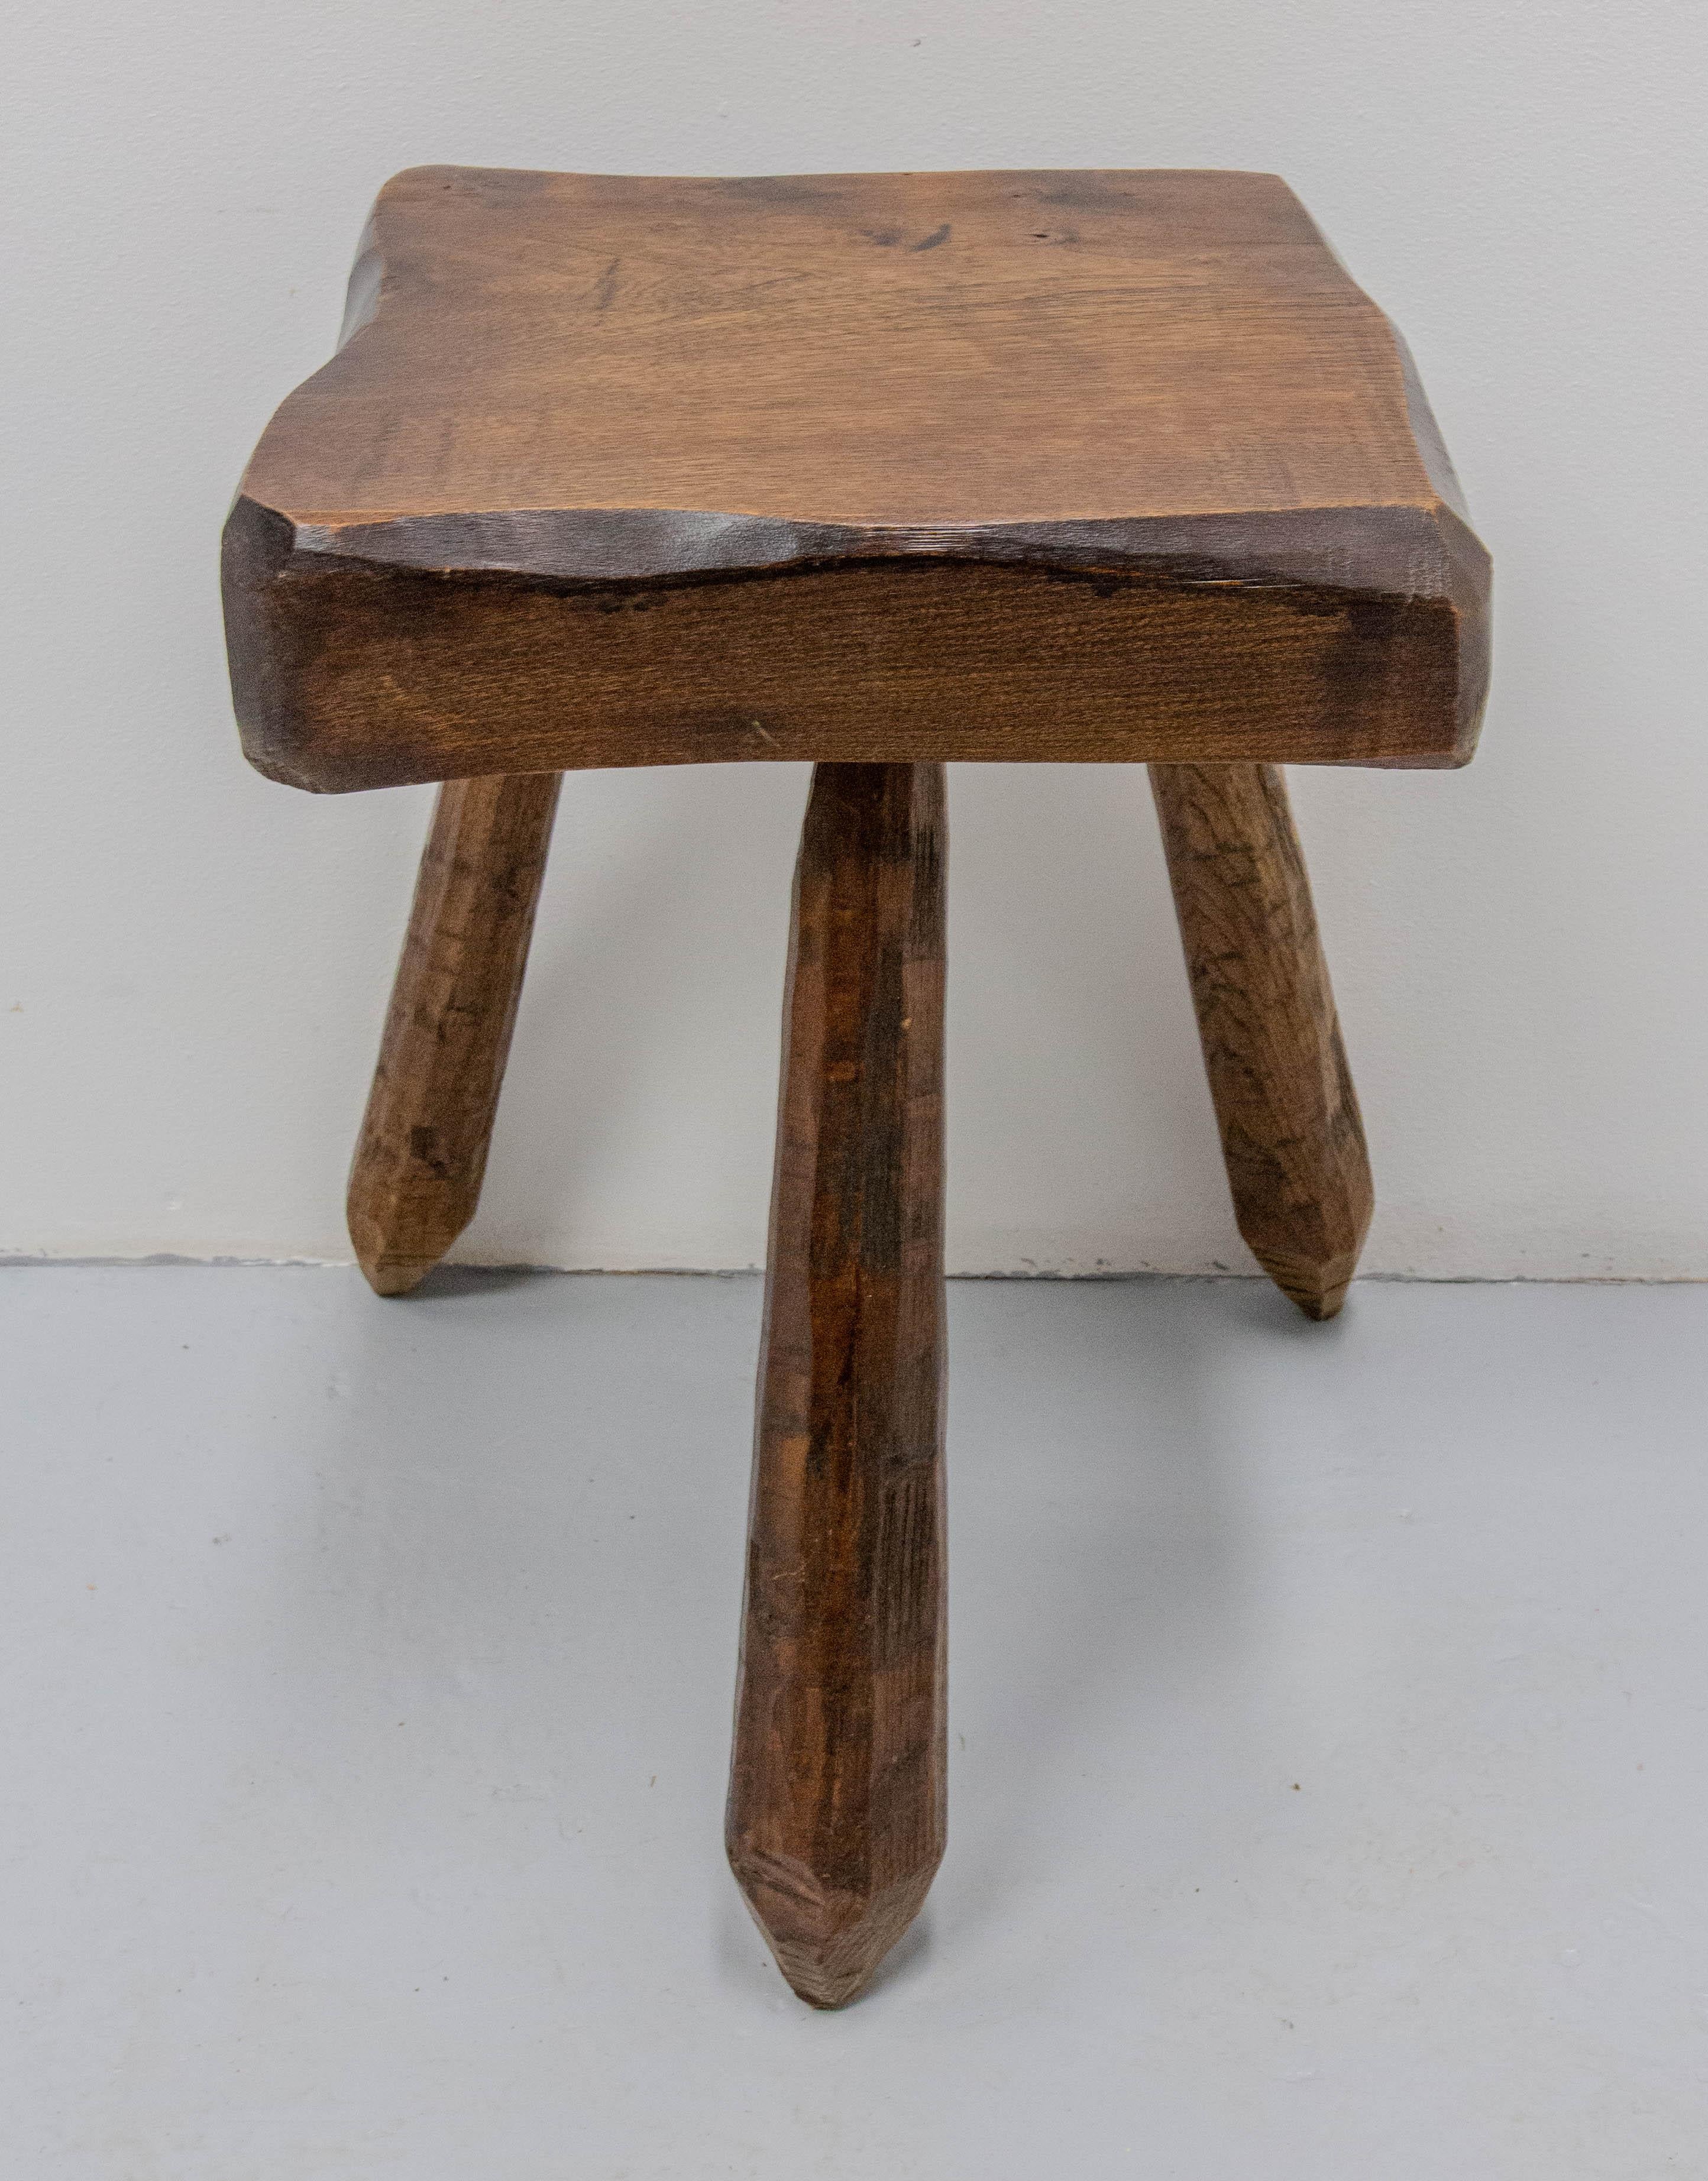 French Provincial Three-Legs Brutalist Stool or Milking Stool Midcentury French For Sale